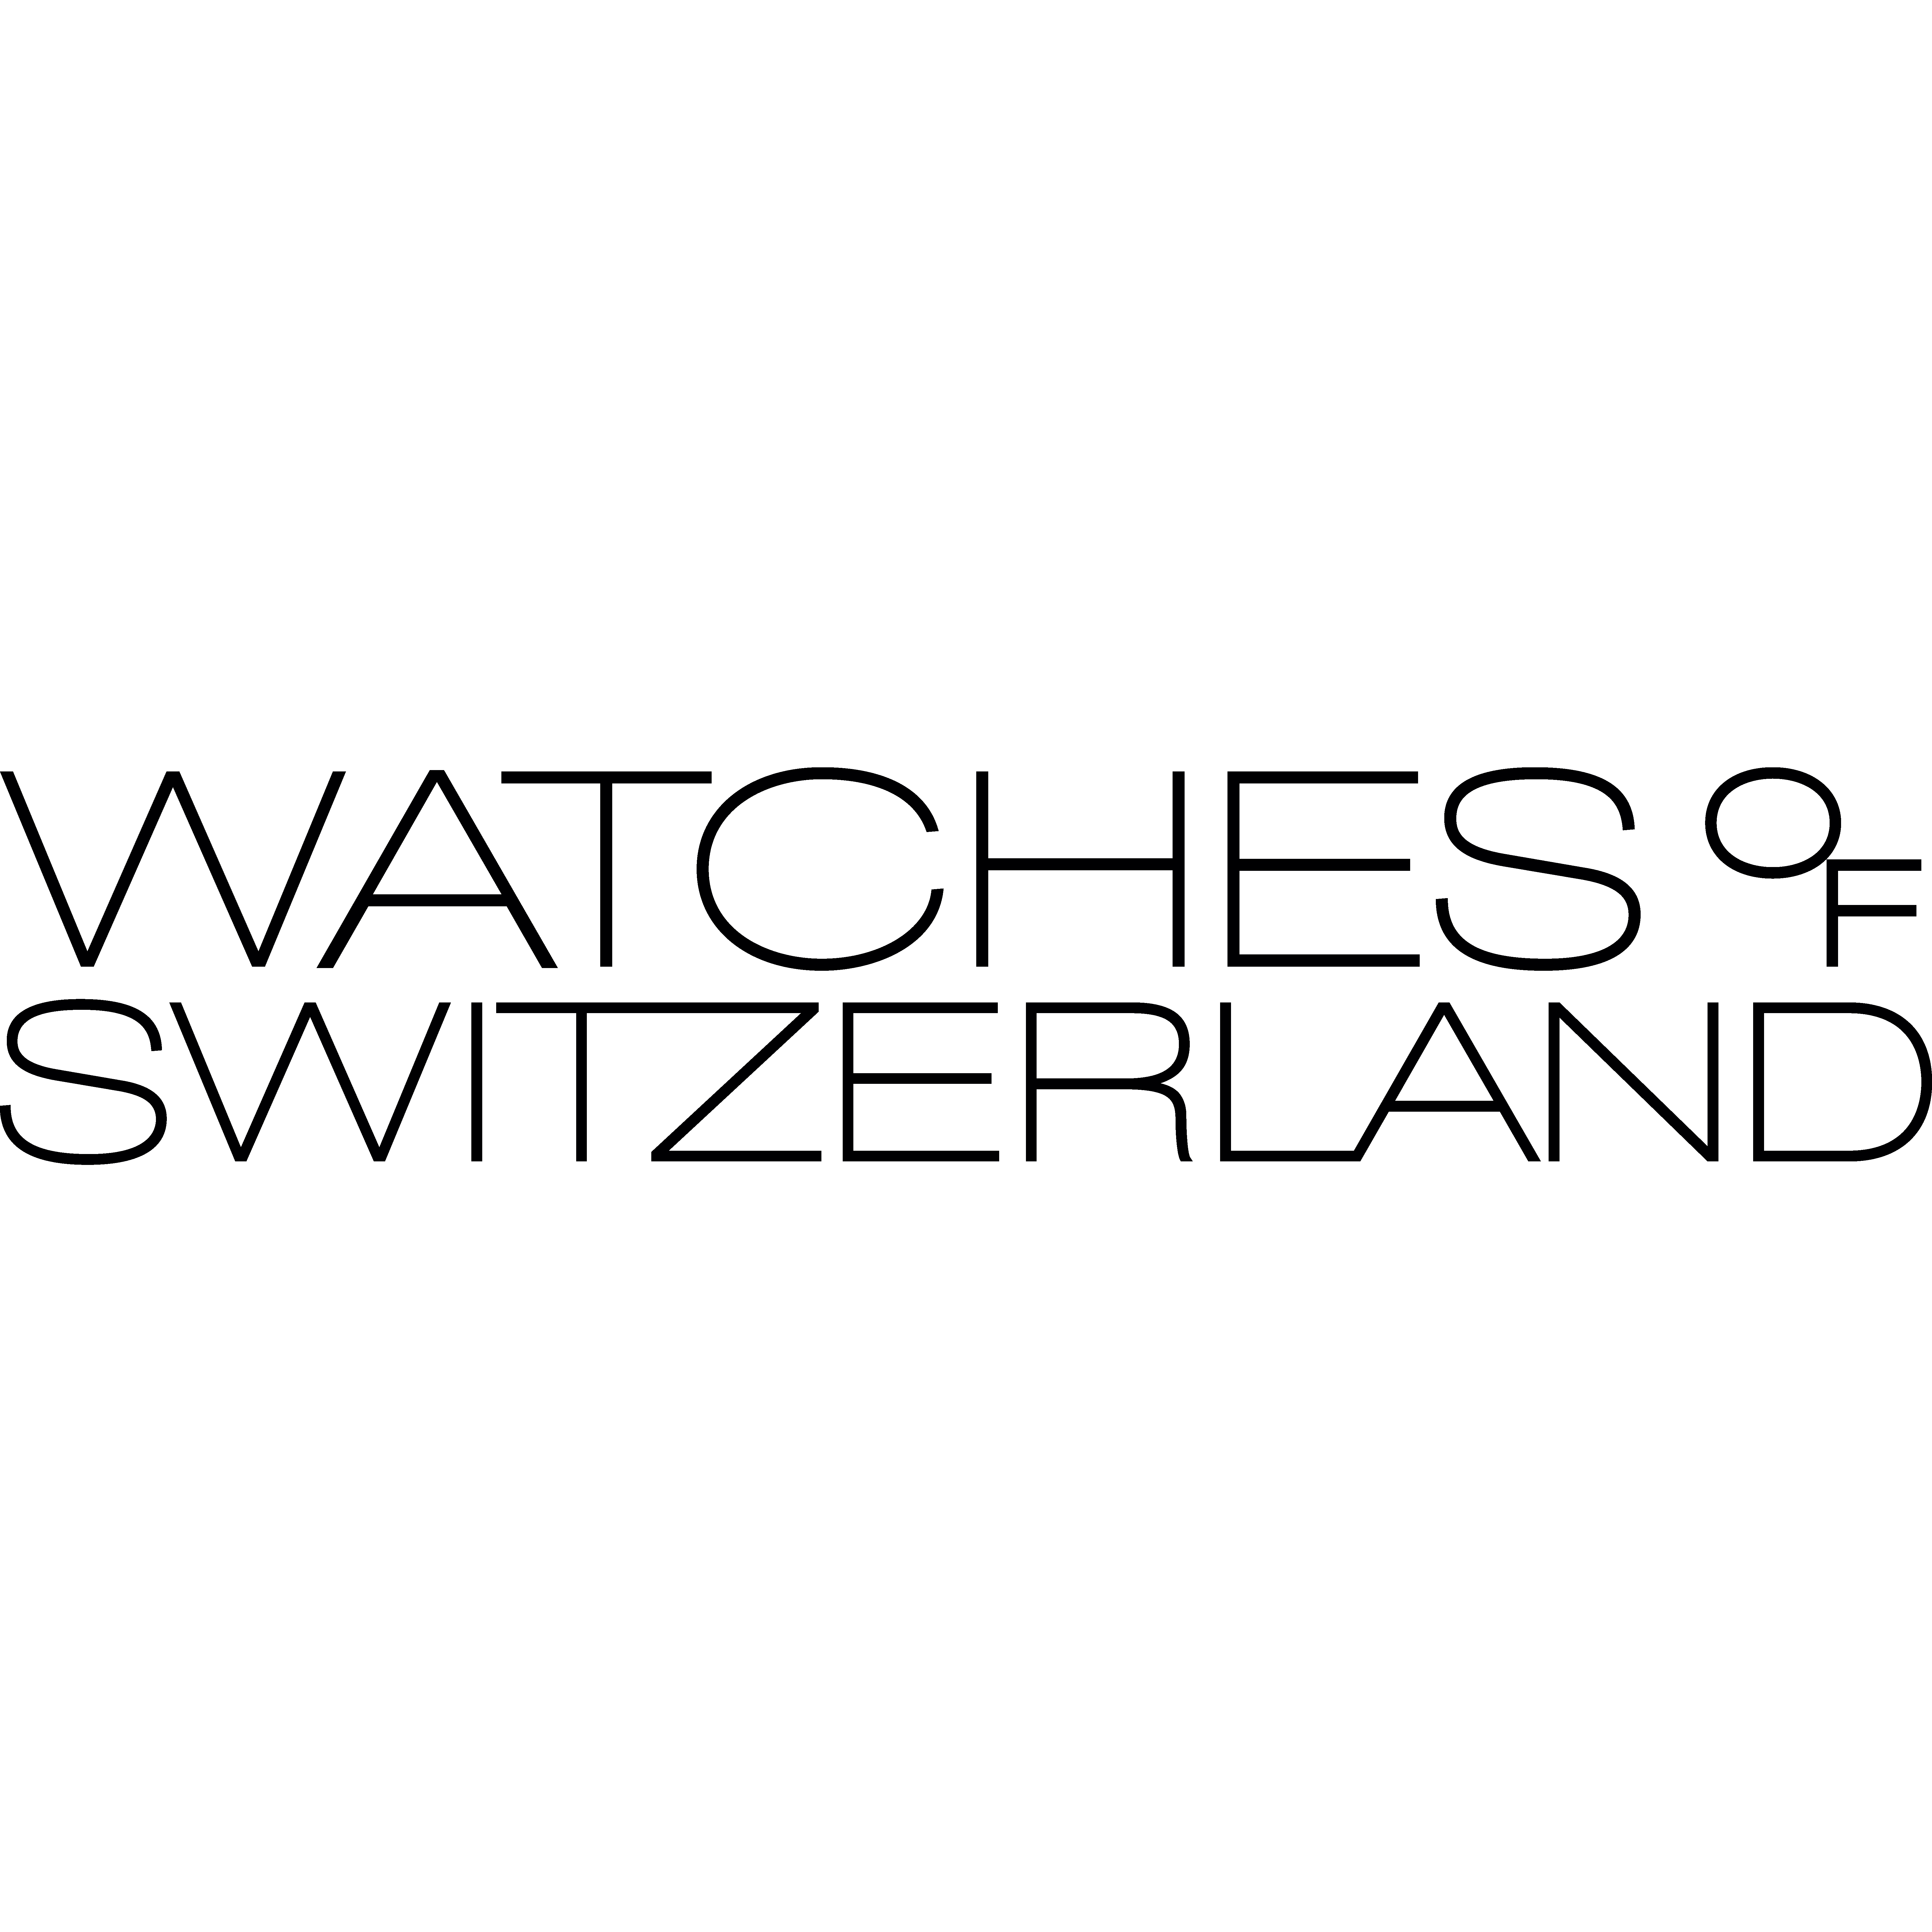 Watches of Switzerland - London, London NW4 3FH - 020 8732 8480 | ShowMeLocal.com